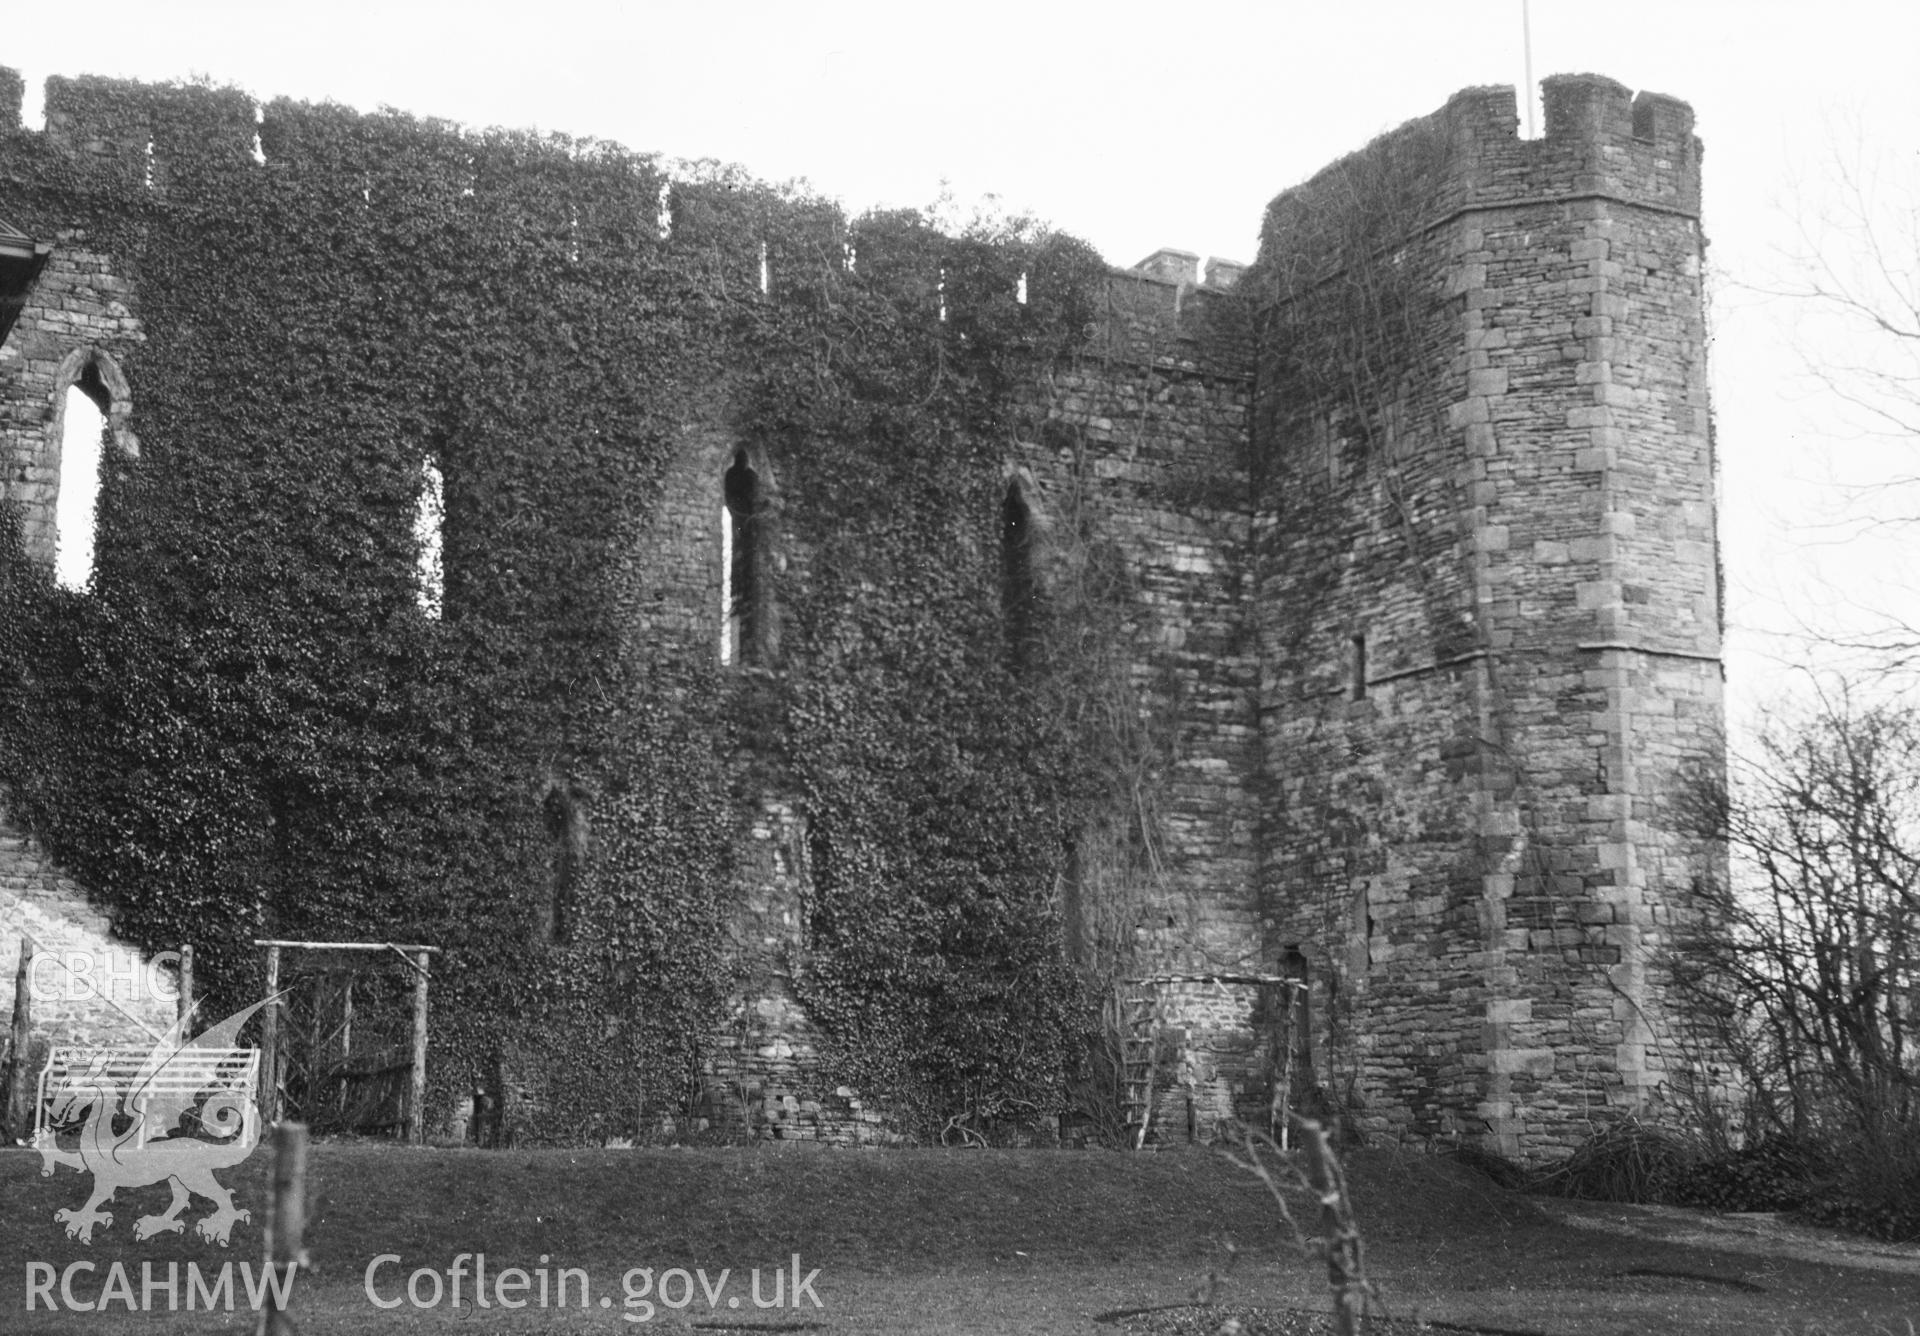 Digital copy of a nitrate negative showing Brecon castle. From the Cadw Monuments in Care Collection.